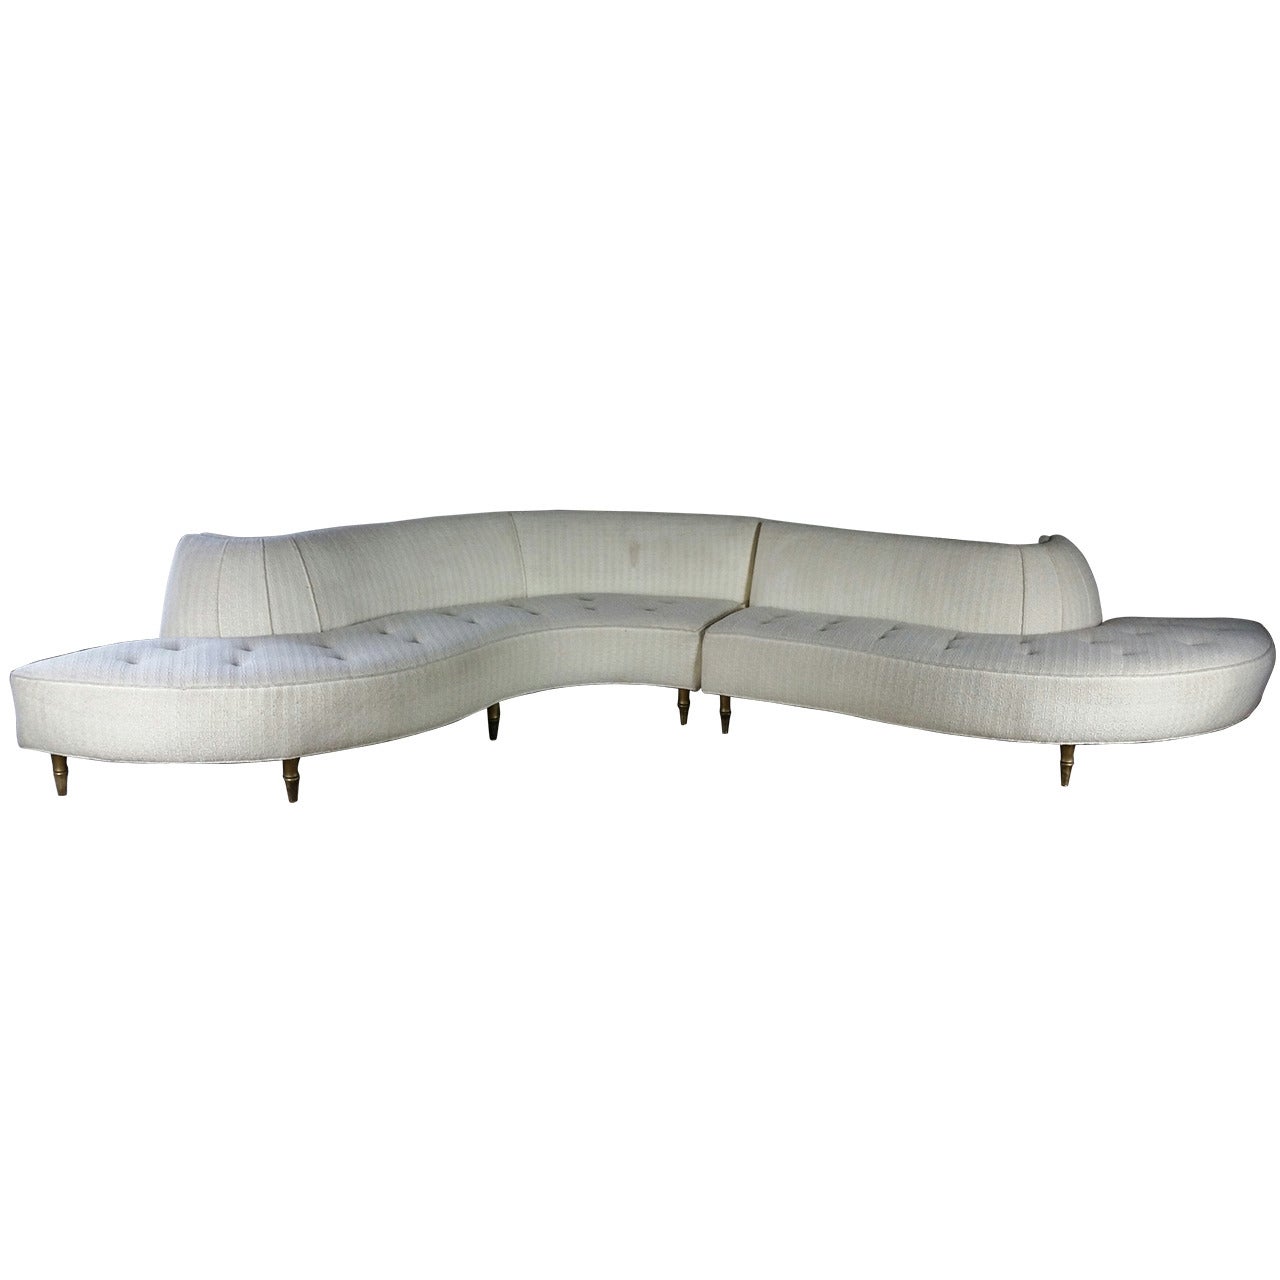 Monumental Two-Piece Serpentine Sectional Sofa, Mid-Century Modern